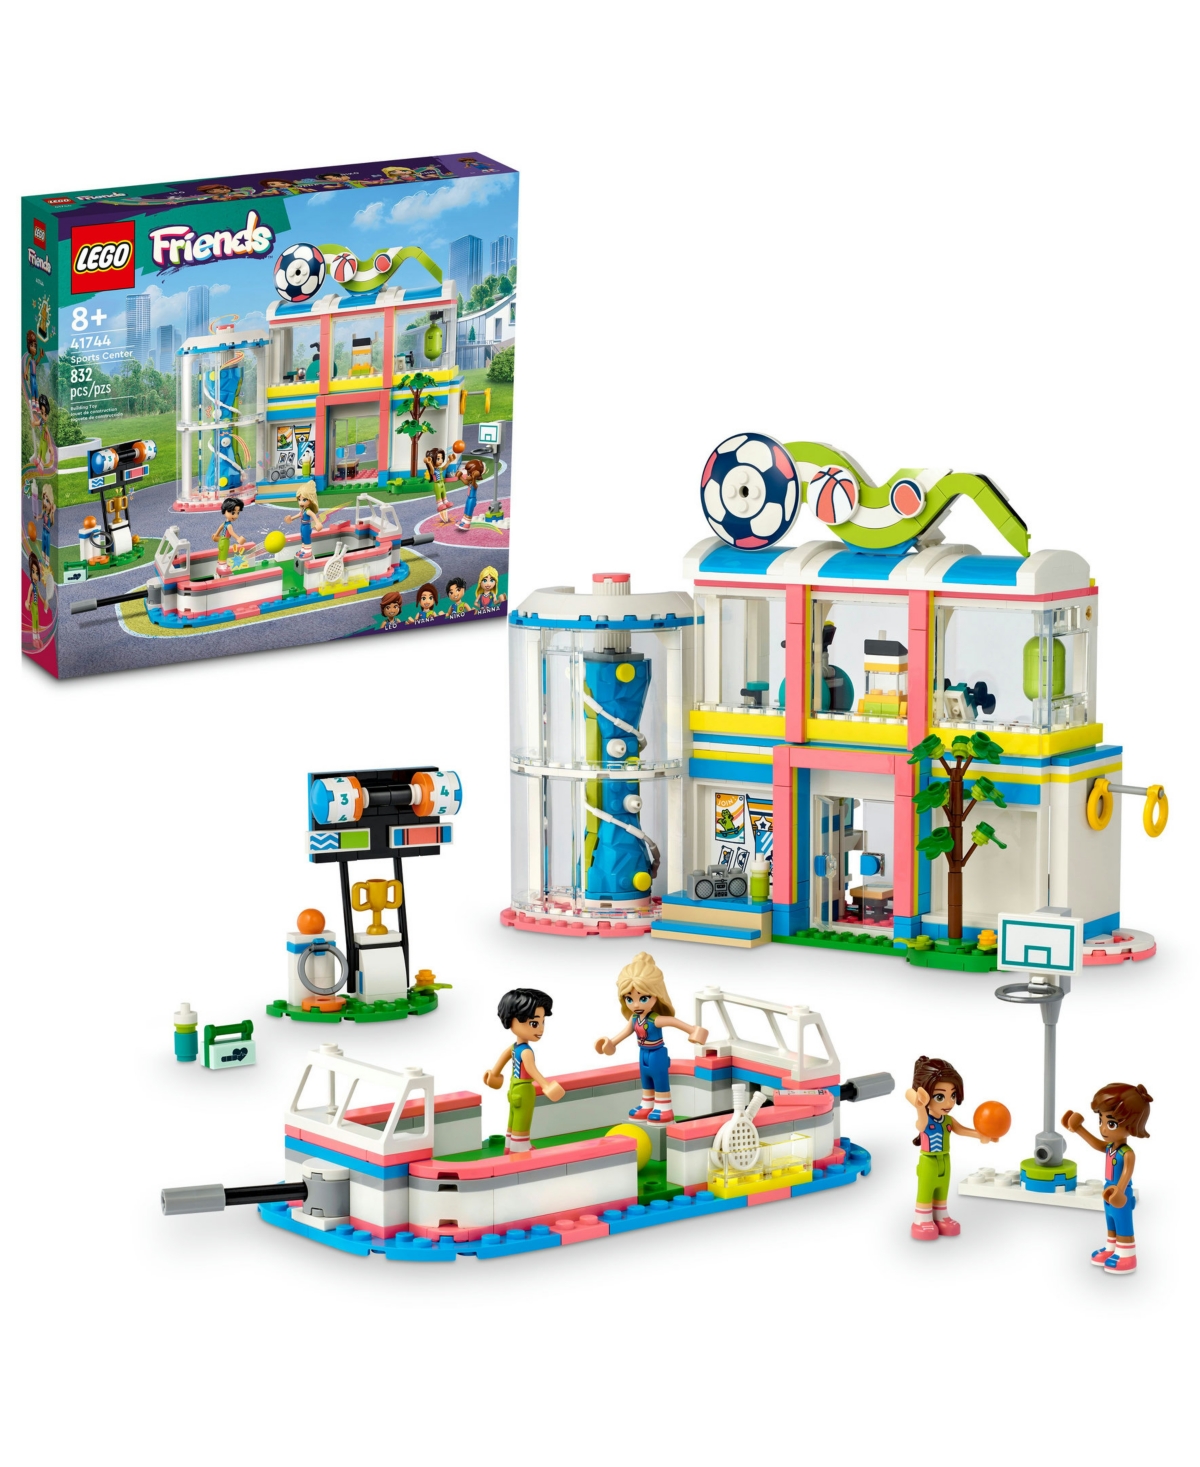 Lego Friends 41744 Sports Center Toy Building Set With Minifigures In Multicolor